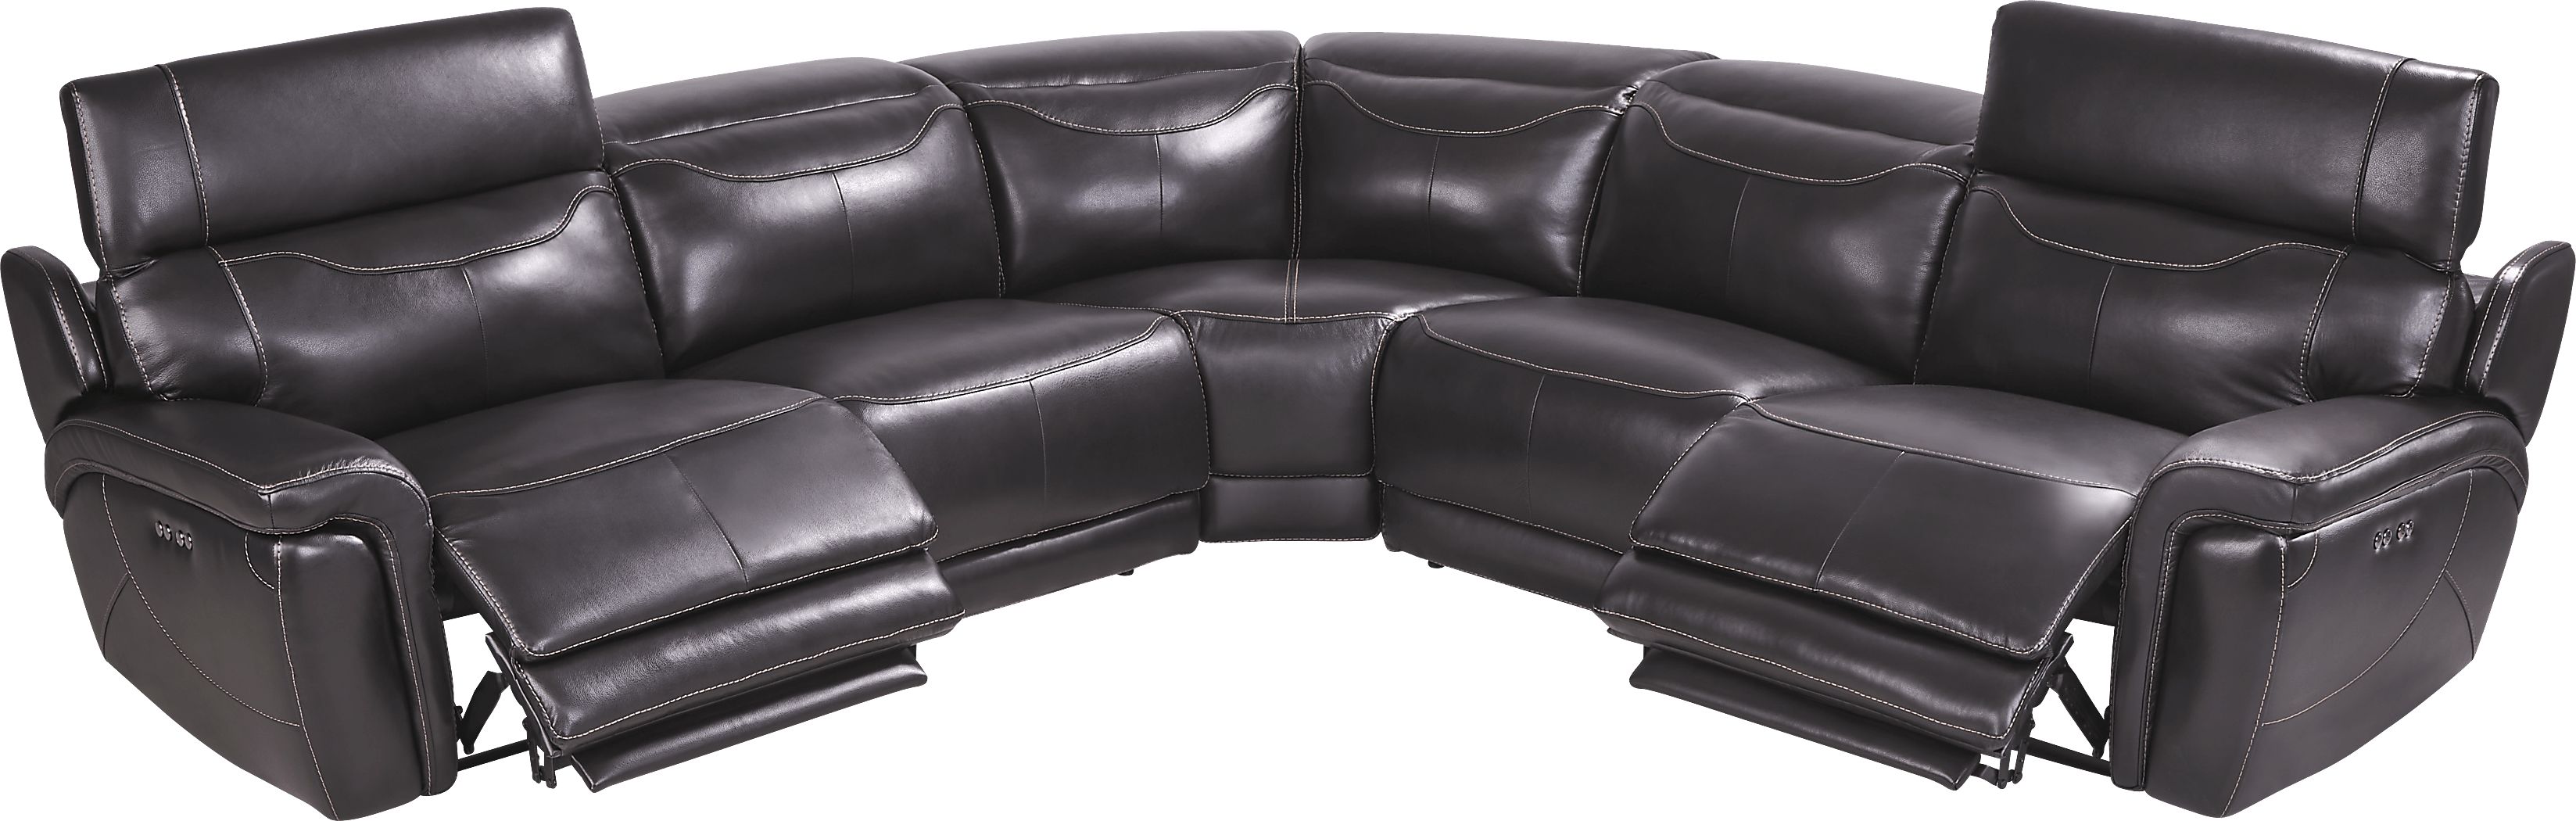 Devero Black Leather 5 Pc Dual Power Reclining Sectional